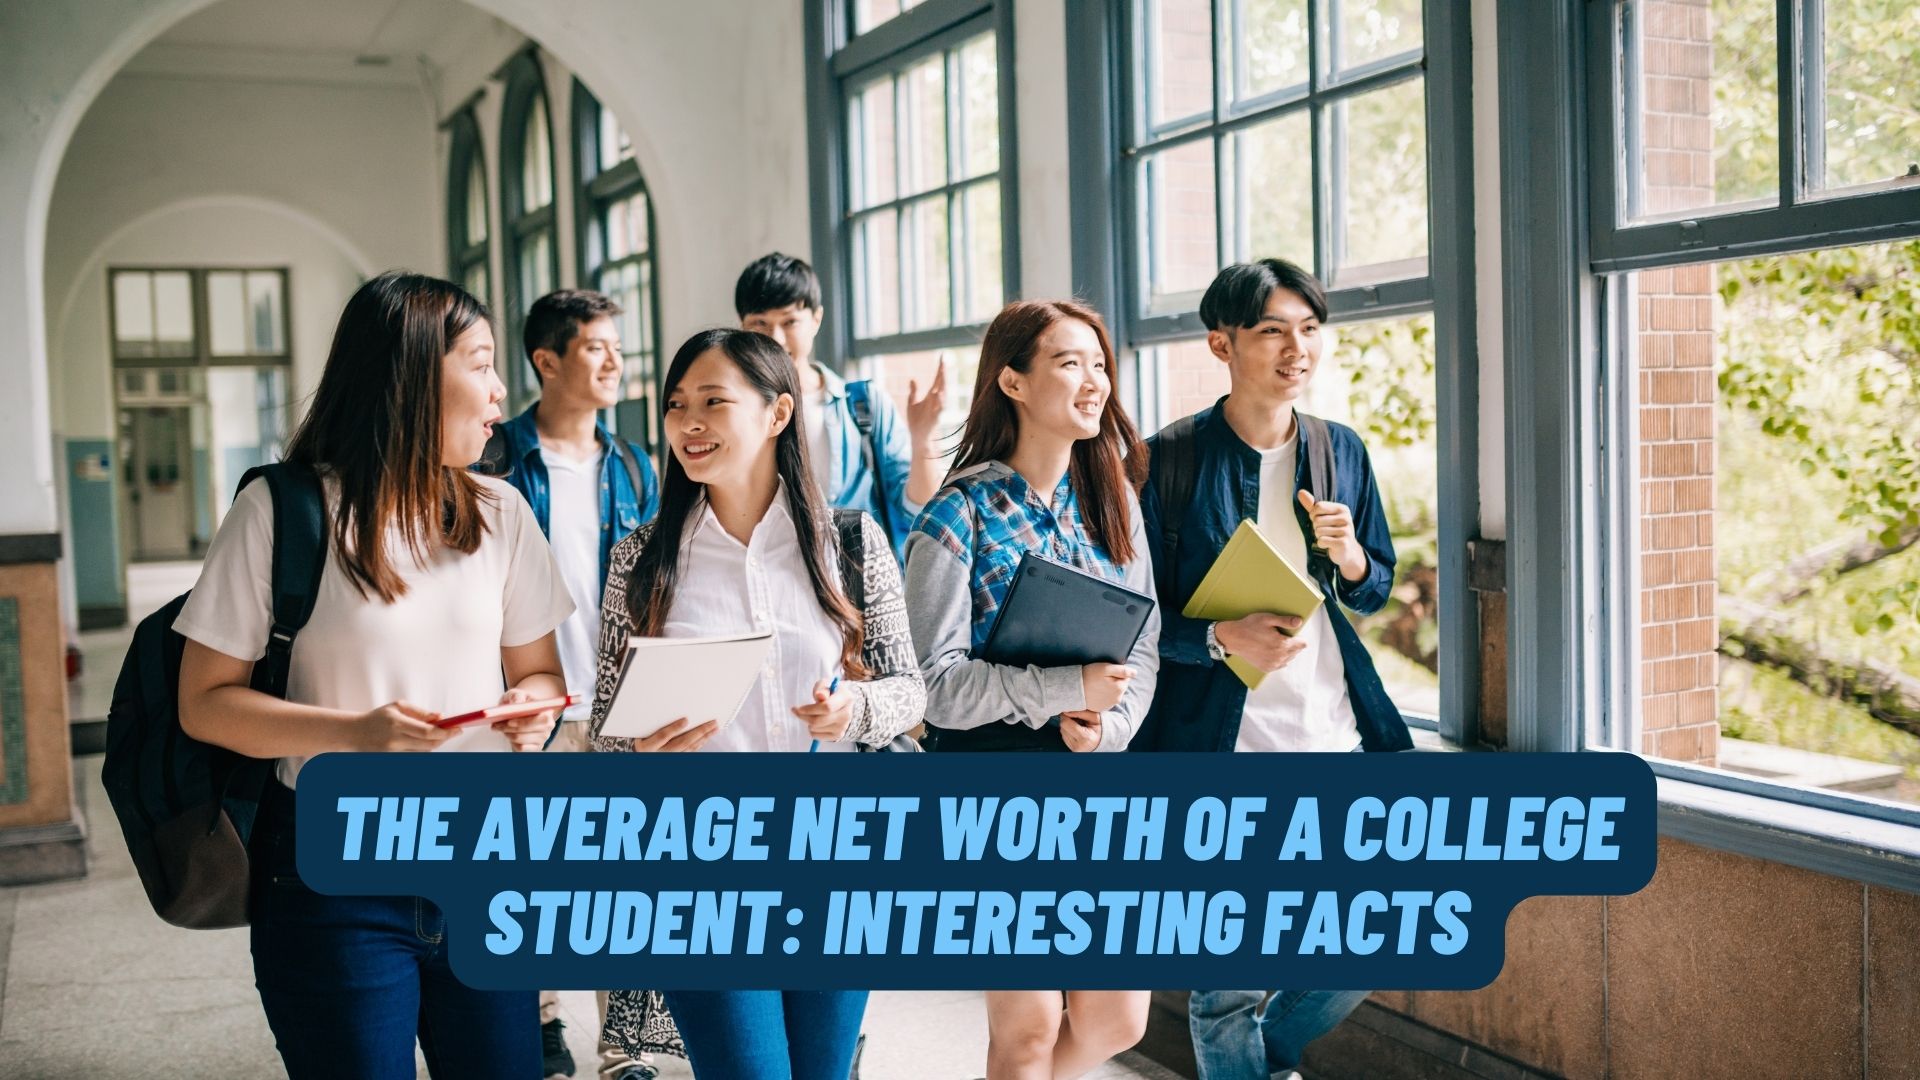 The average net worth of a college student: interesting facts